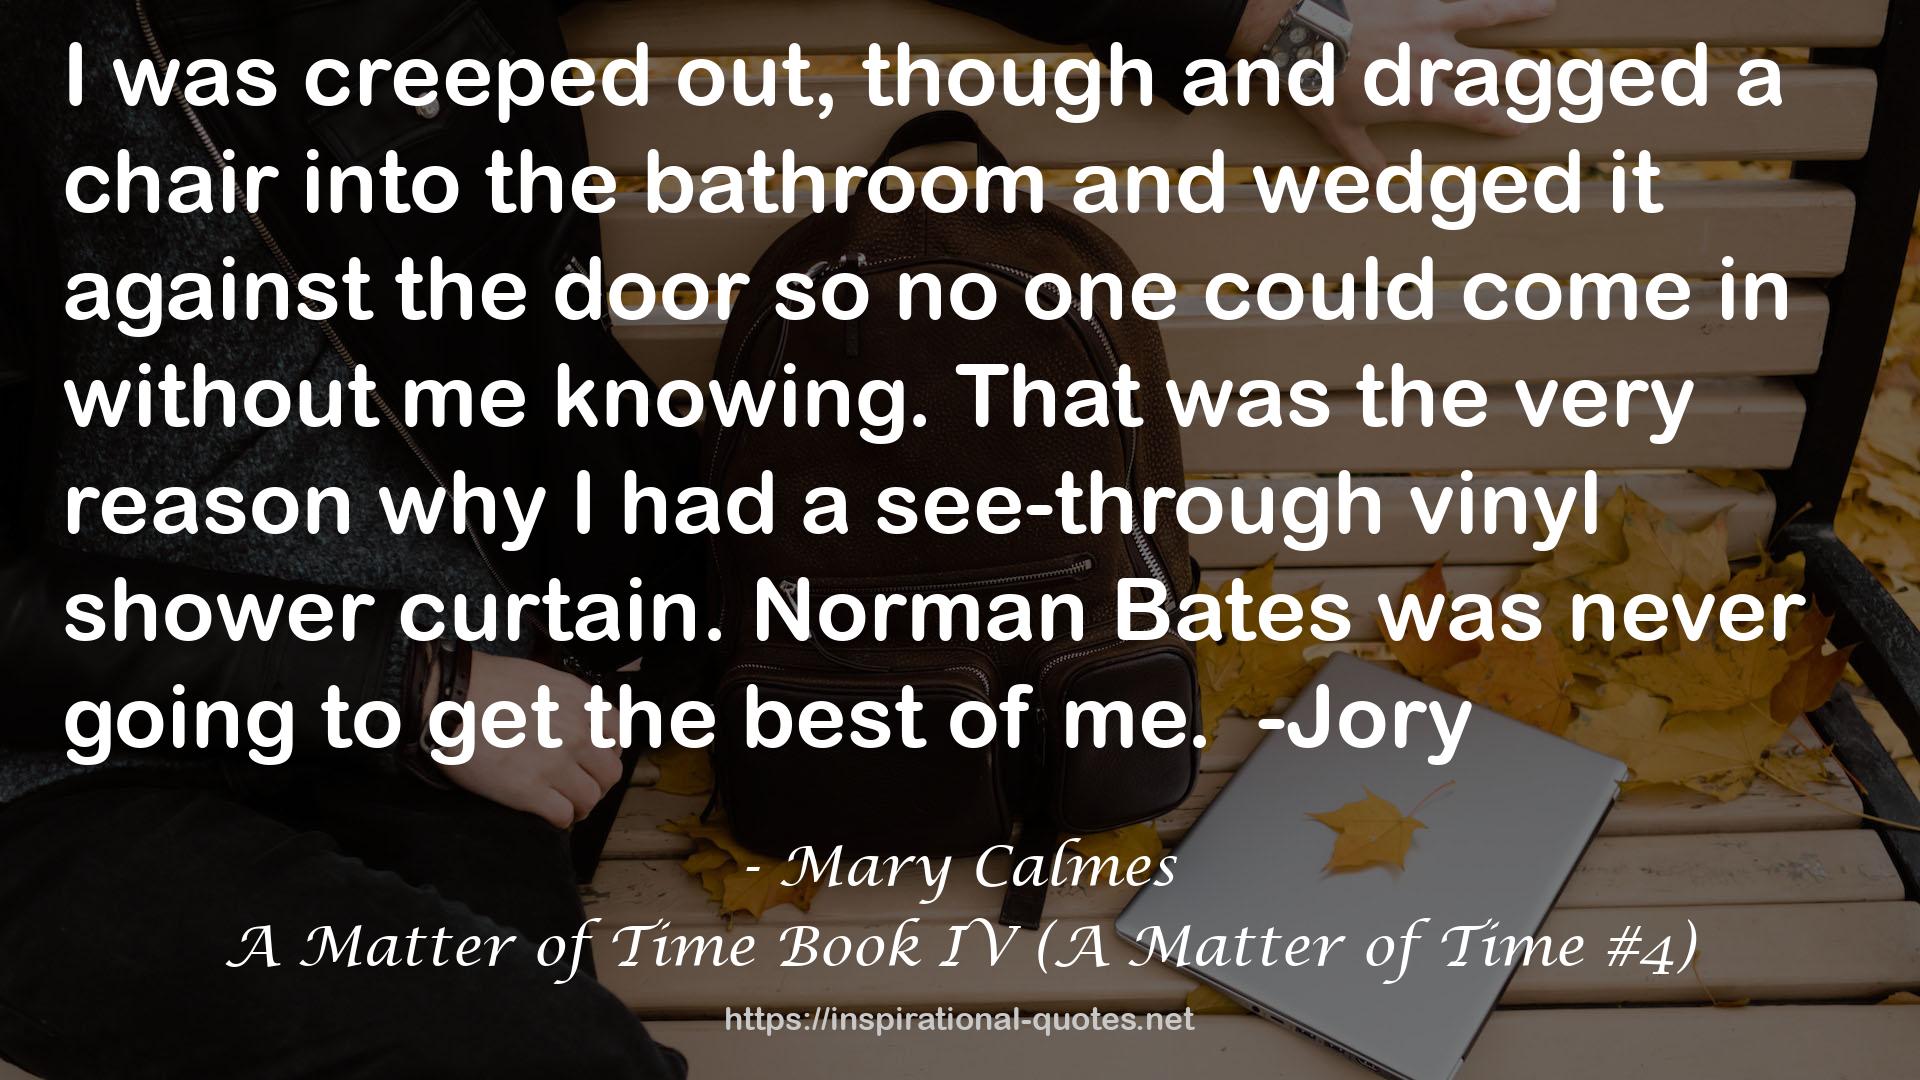 A Matter of Time Book IV (A Matter of Time #4) QUOTES